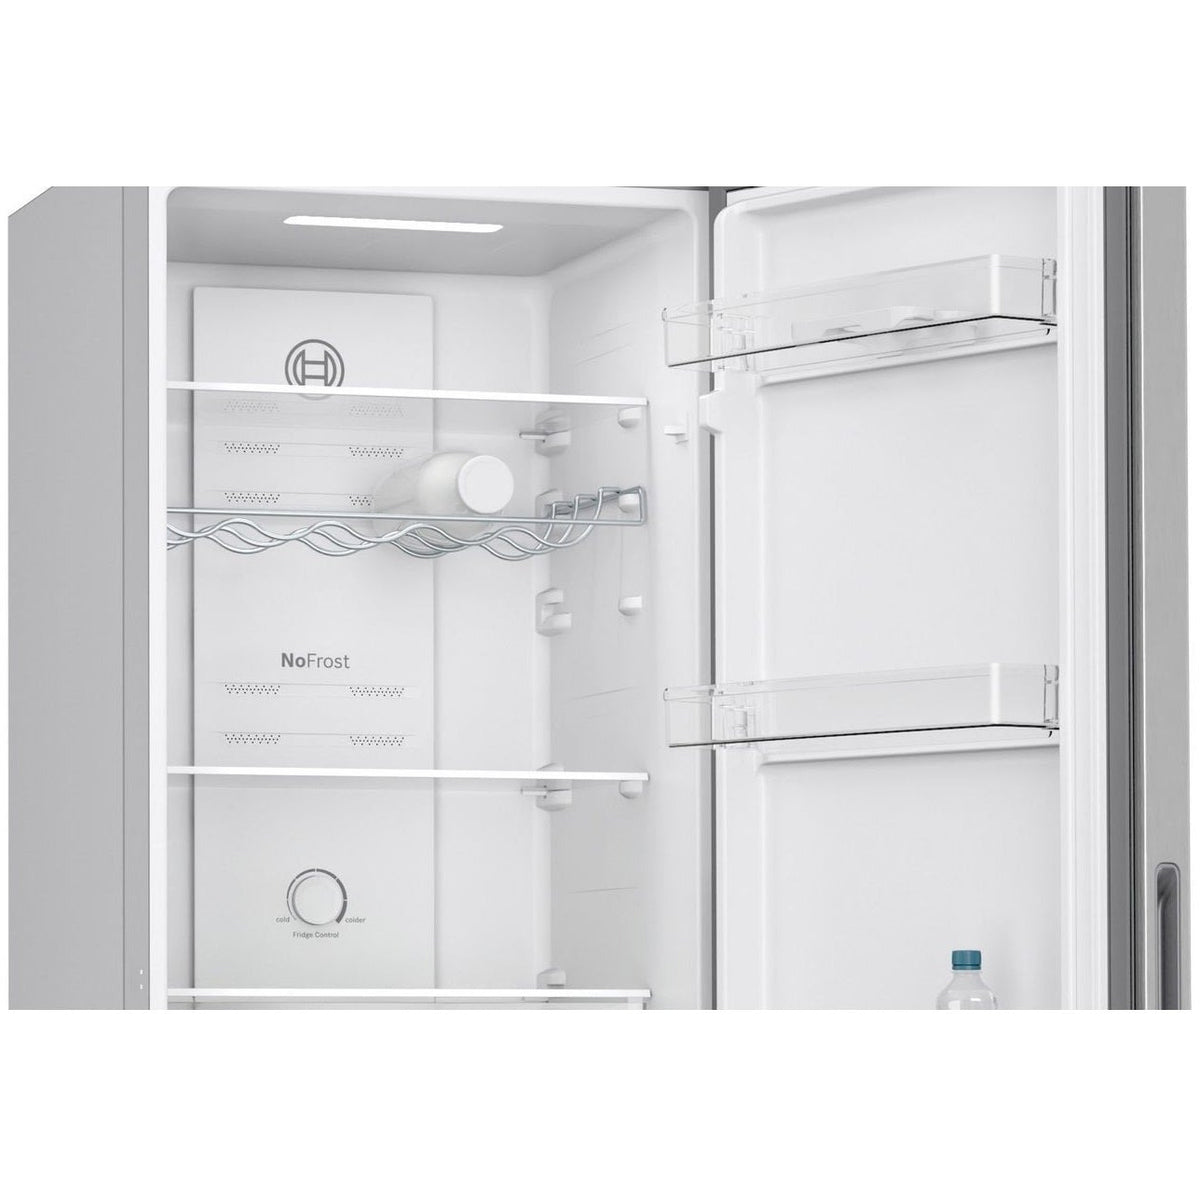 Bosch Series 2 50/50 255L Frost Free Fridge Freezer - Stainless Steel Effect | KGN27NLEAG from Bosch - DID Electrical